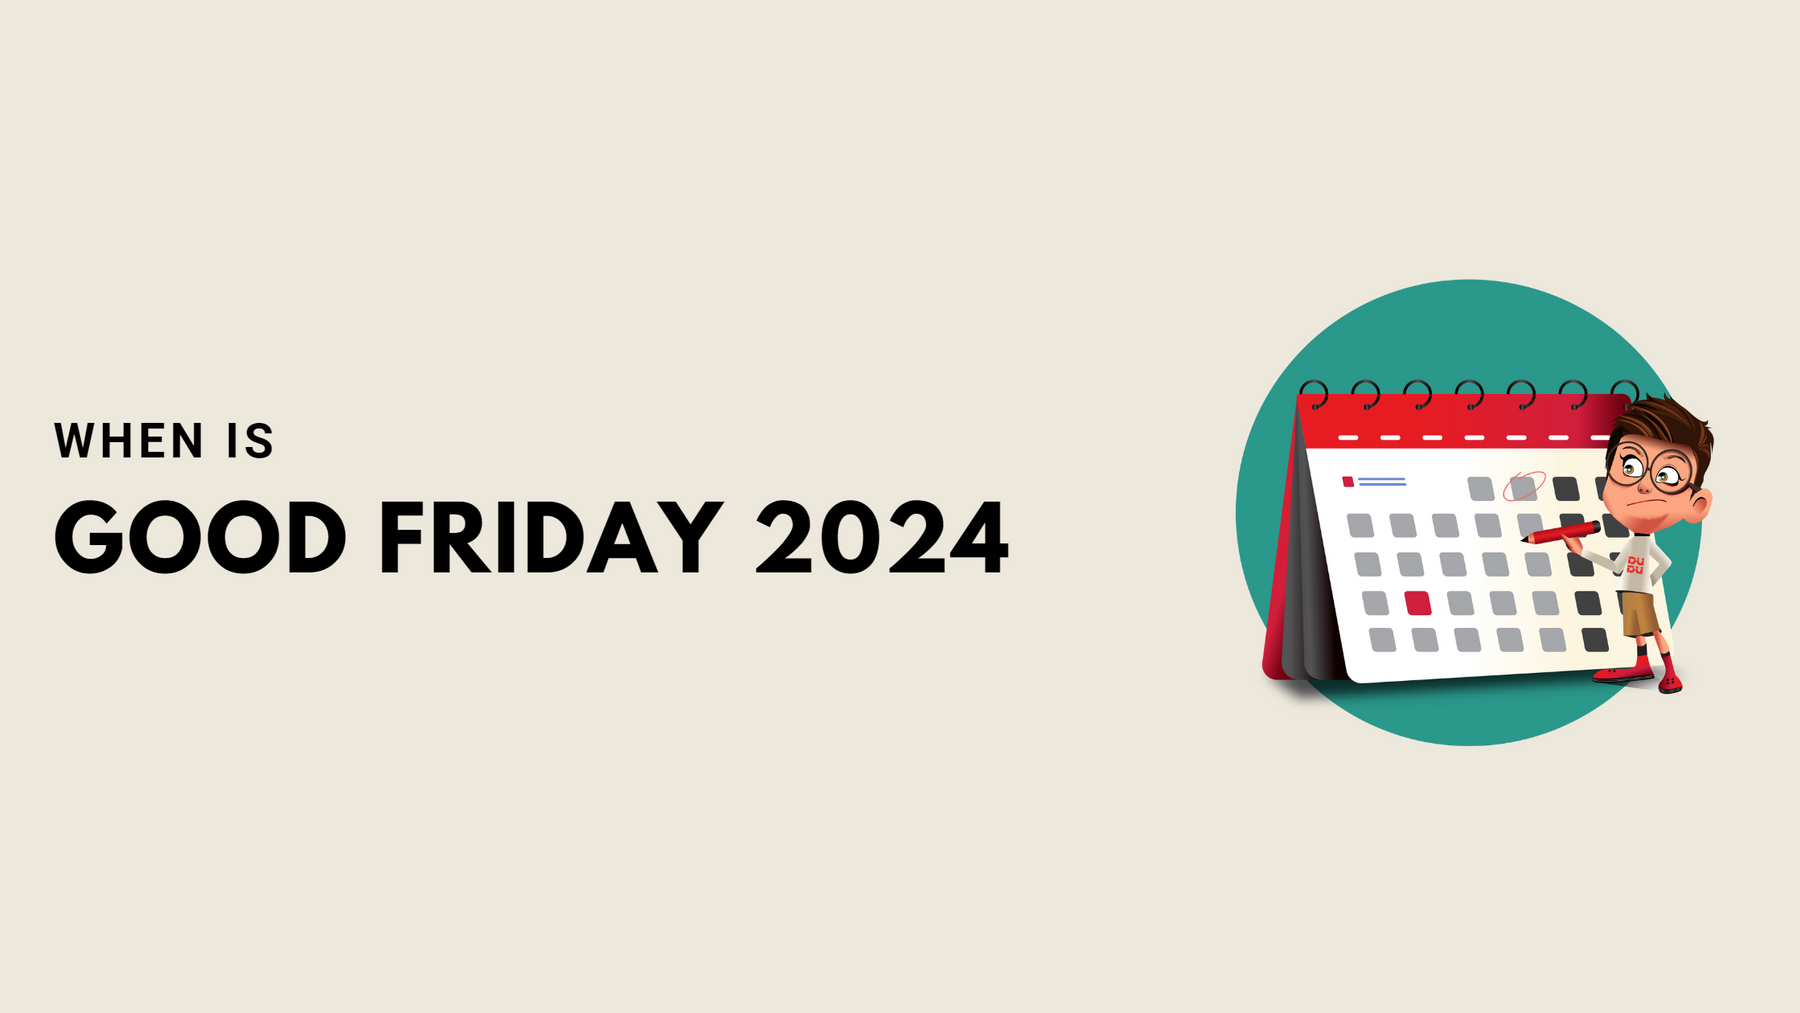 When Is Good Friday 2024?